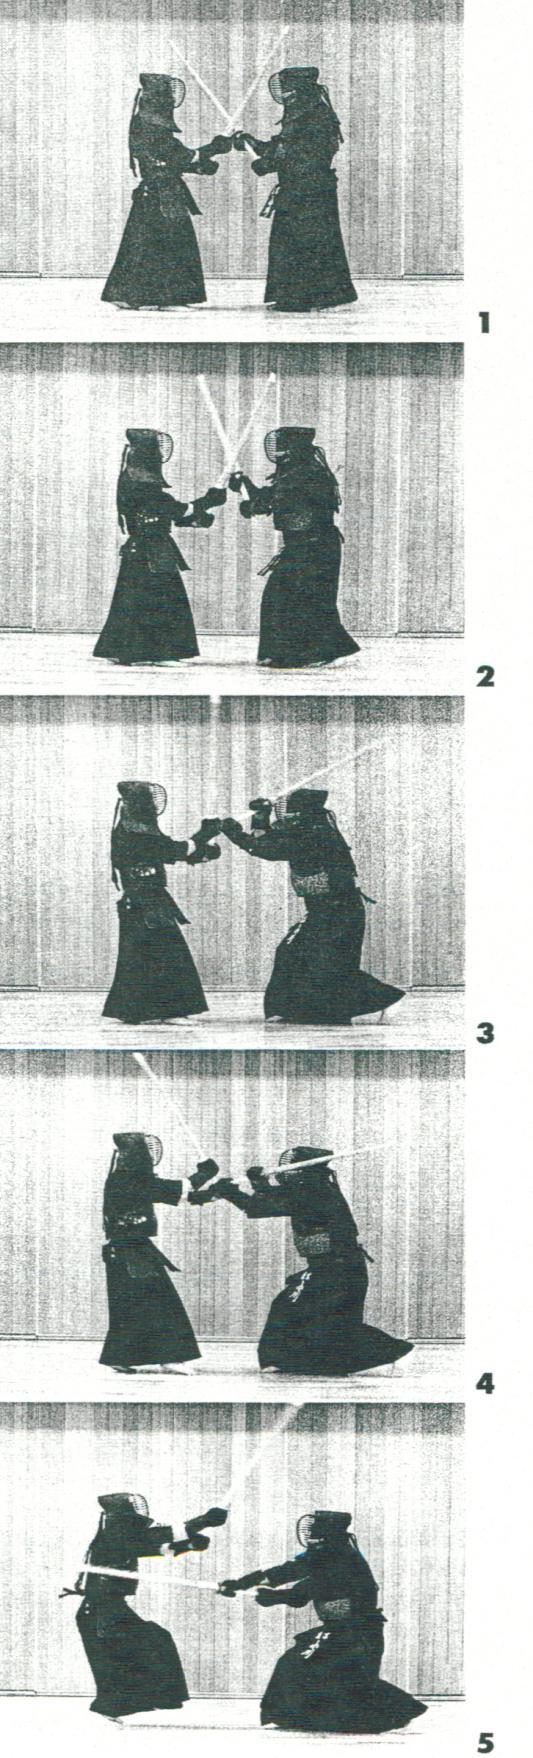 KENDO CLASSROOM ( 剣道教室 ) for Wining Kendo Waza Tsubazeriai Page 9 of 9 Hiki Dō against Hiki Men CASE 3 Hiki Dō ( 引き胴 ) by feinting Hiki Men CASE 1 (See page 8, picture 1-8 and A-C.